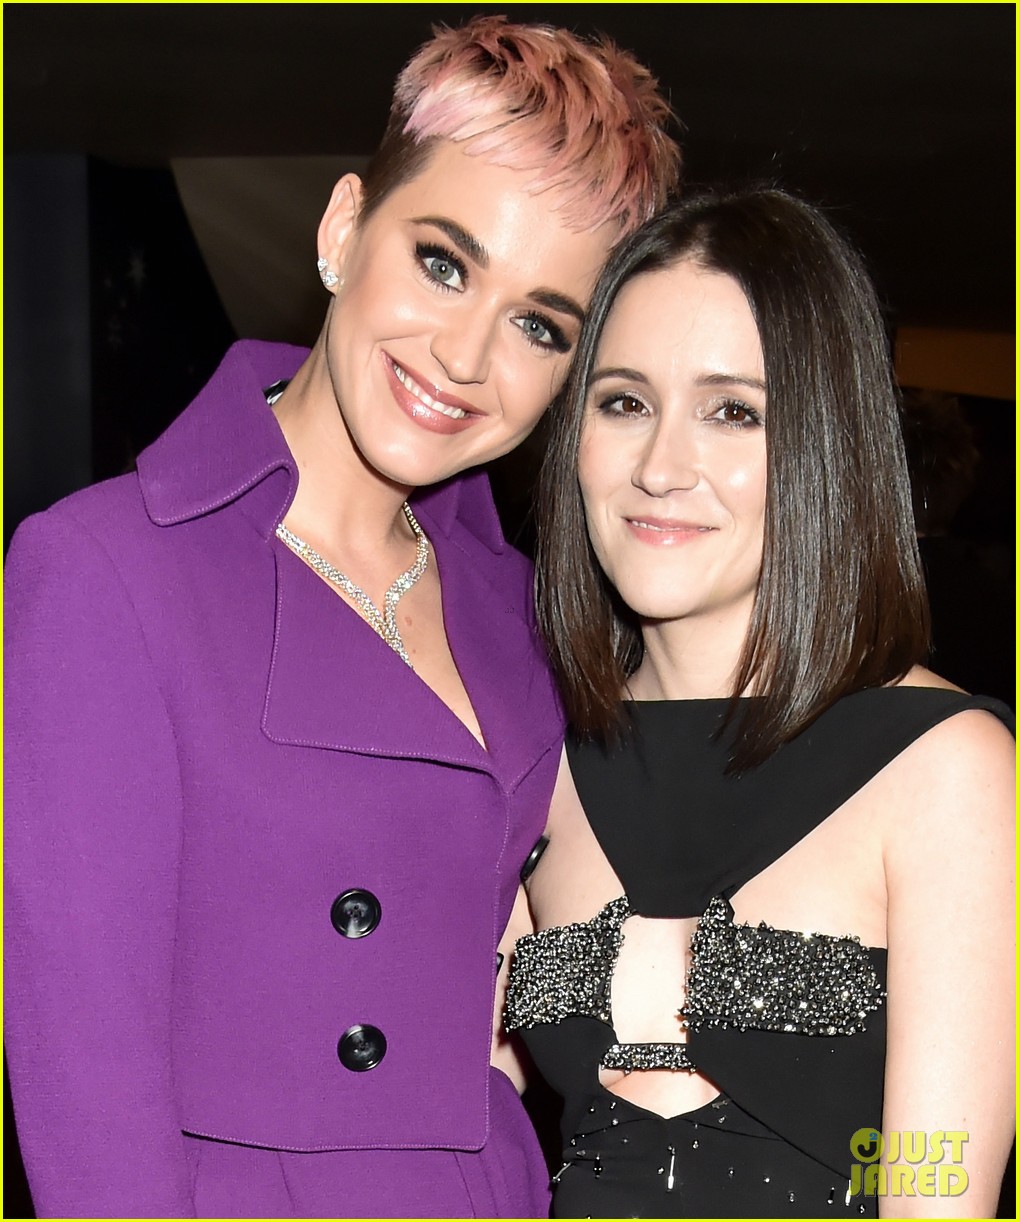 katy perry supports bestie shannon woodward at westworld season 2 premiere 04